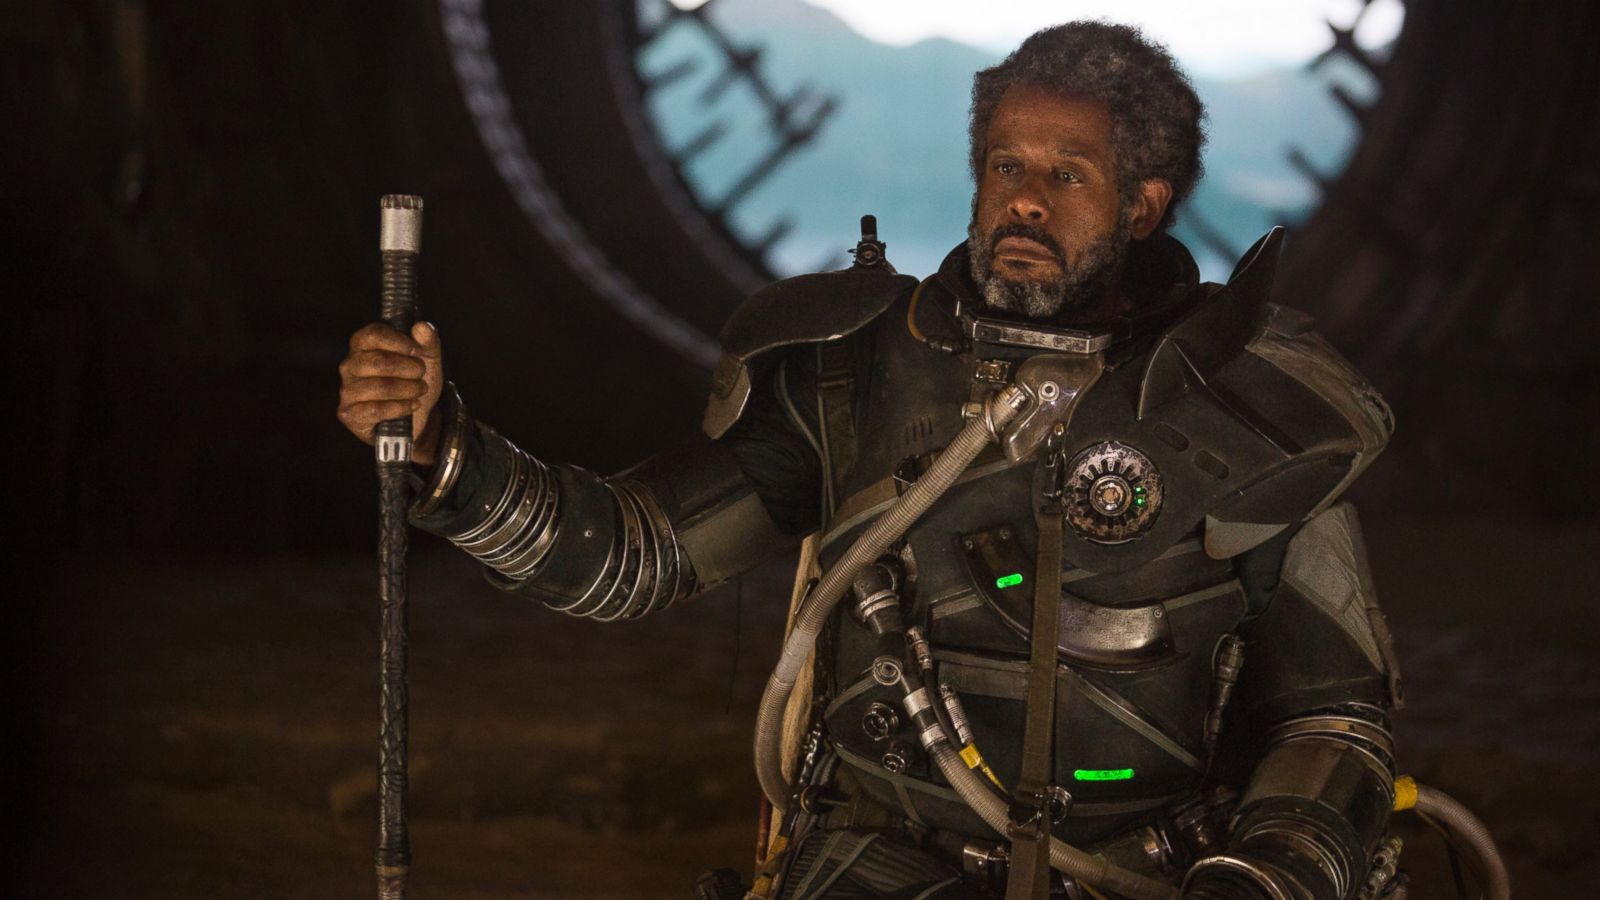 https://s.abcnews.com/images/US/ht-RogueOne-Forest-Whitaker-hb-161214_16x9_1600.jpg